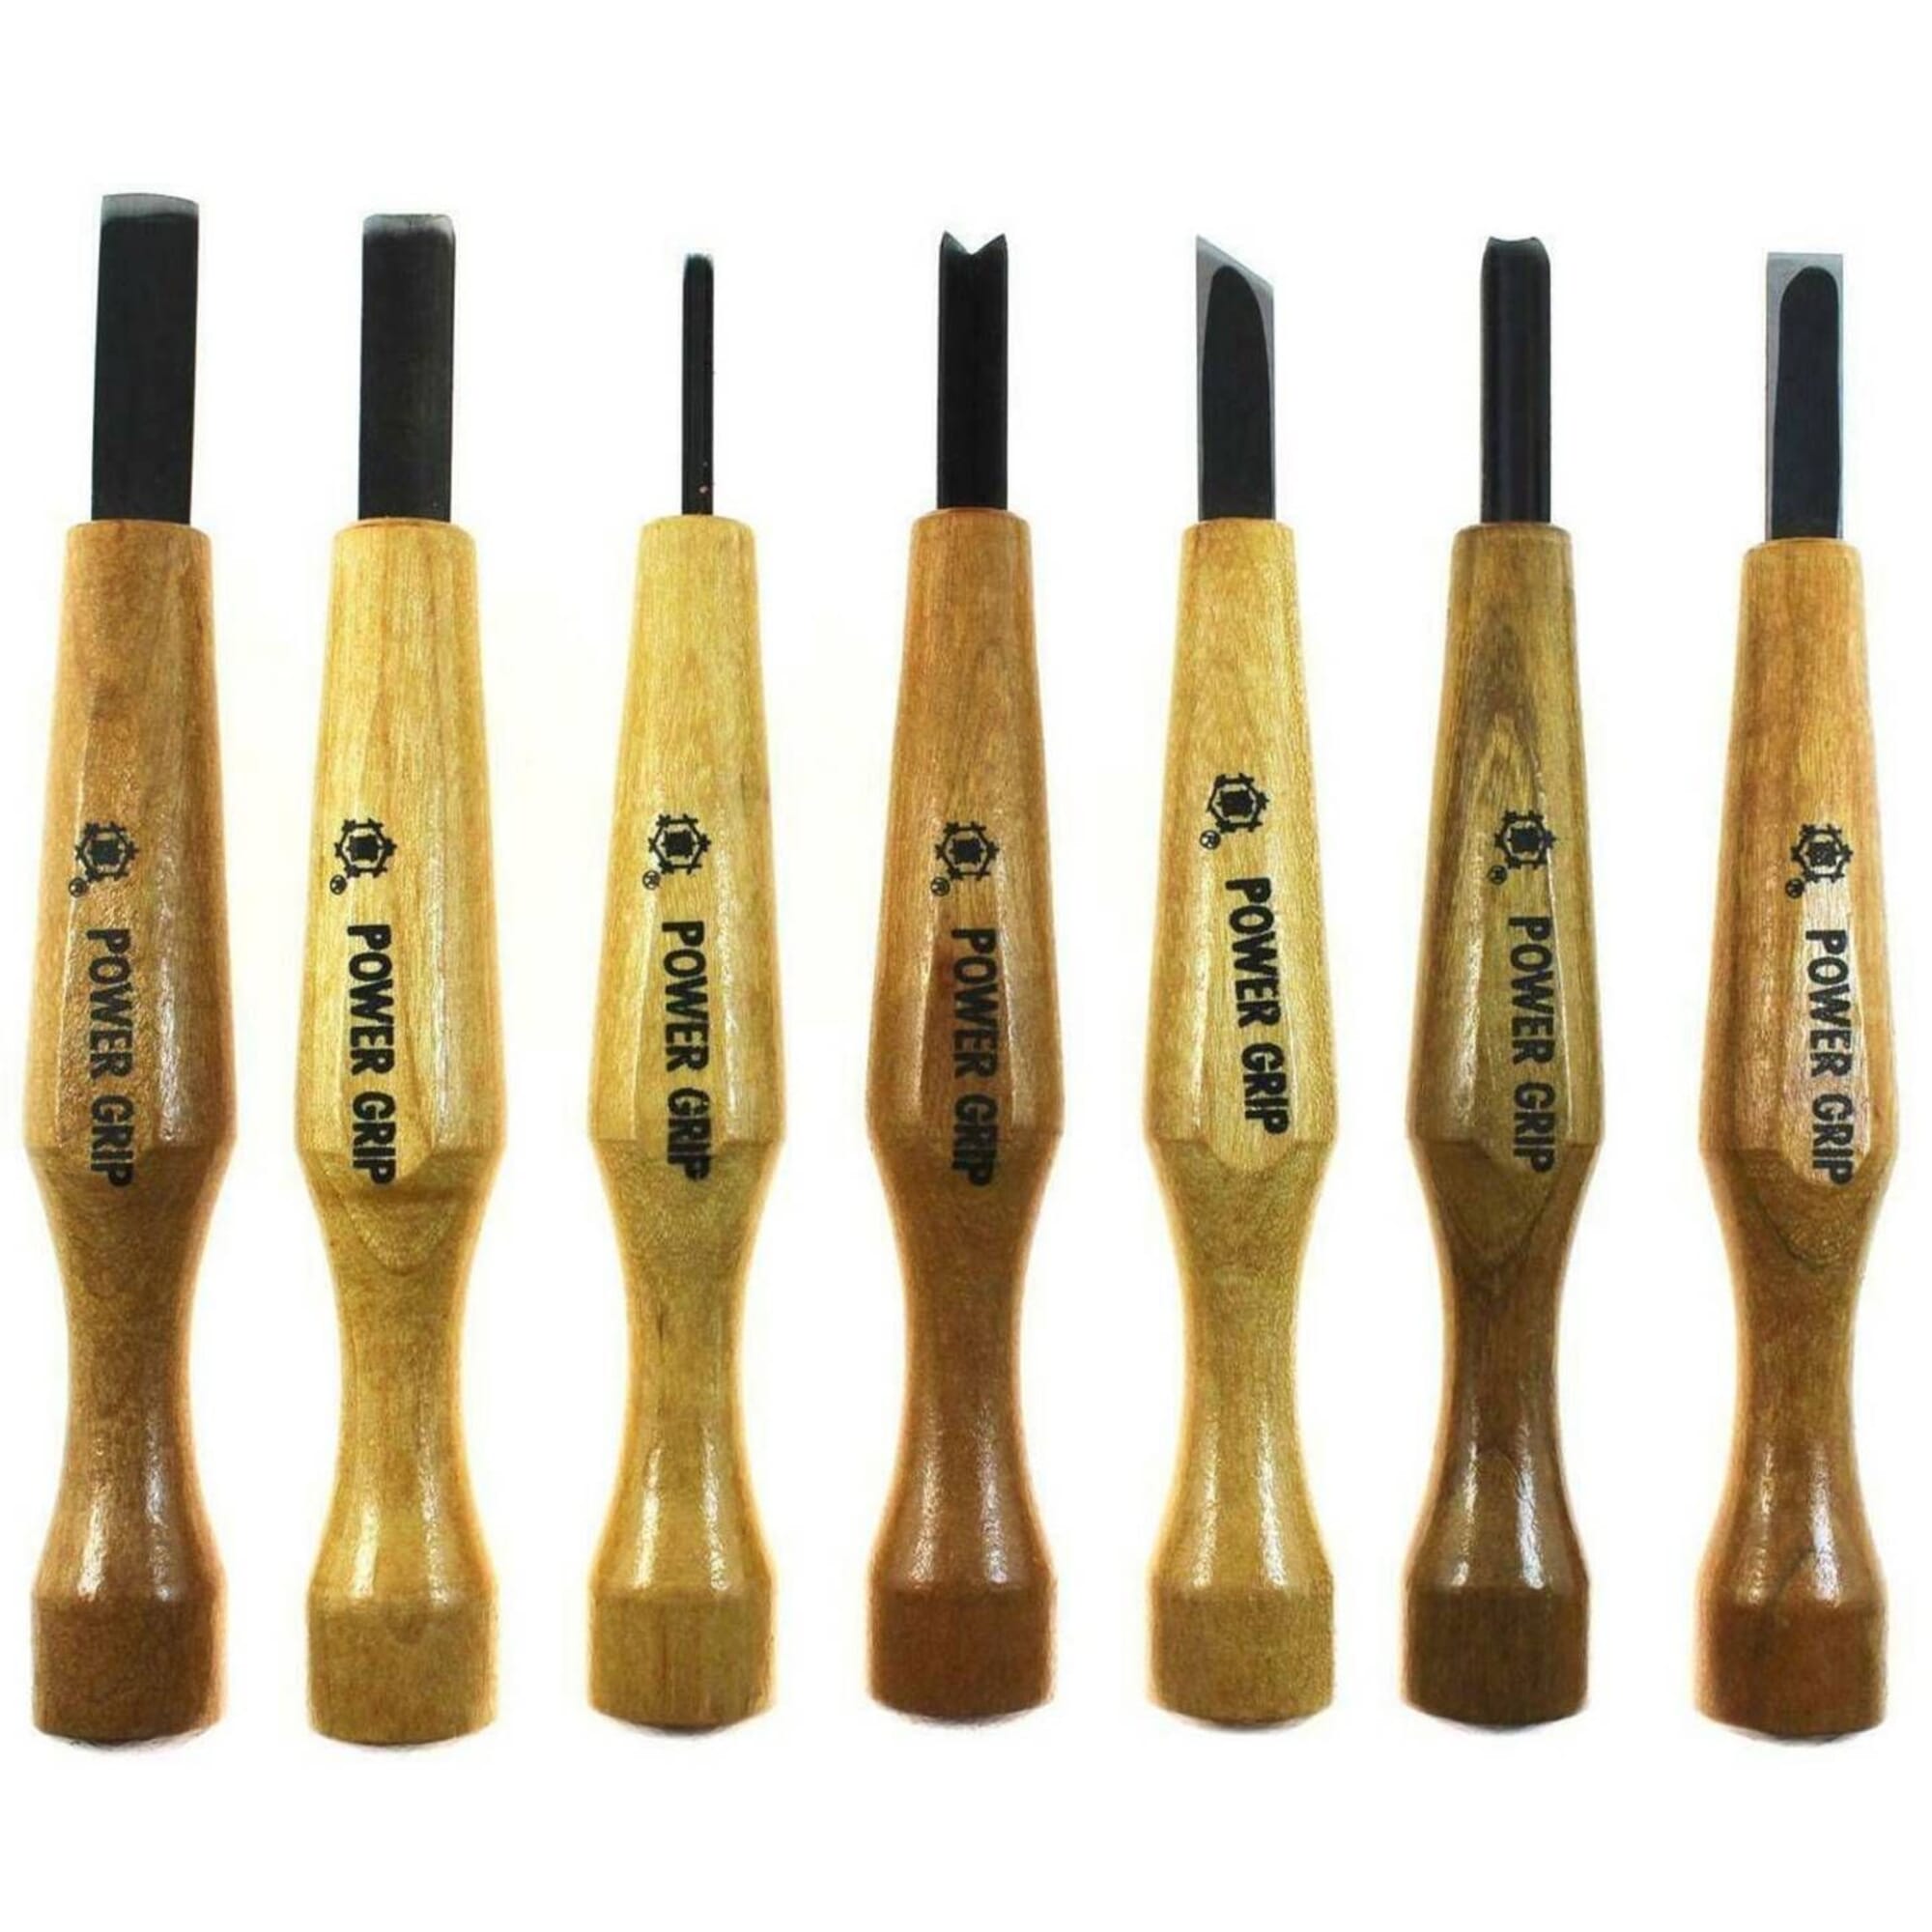 Mikisyo Power Grip Woodcarving 7-Piece Set Left Handed Gouges